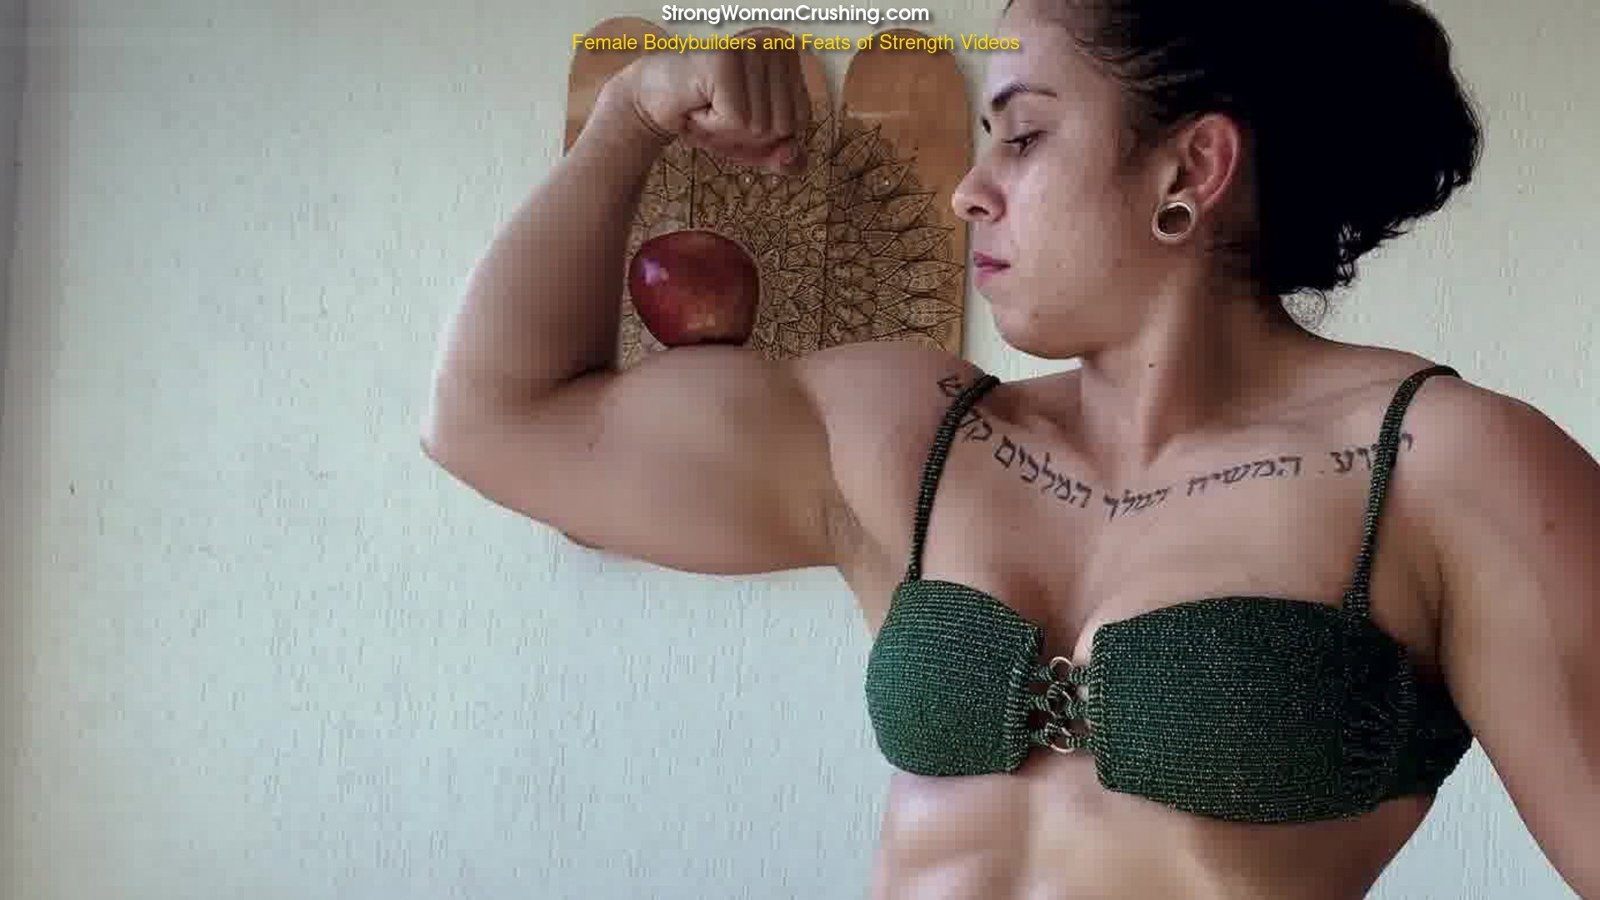 Photo by MusclegirlStrength with the username @MusclegirlStrength, who is a brand user,  April 18, 2024 at 12:30 PM and the text says 'Sassenach Smashes Apples with Insane Strength!: StrongWomanCrushing.com

#musclegirl #musclegirllove #femalemuscle #femalemuscles #featsofstrength #MuscleCrush #PowerfulWomen #StrengthAndFruit'